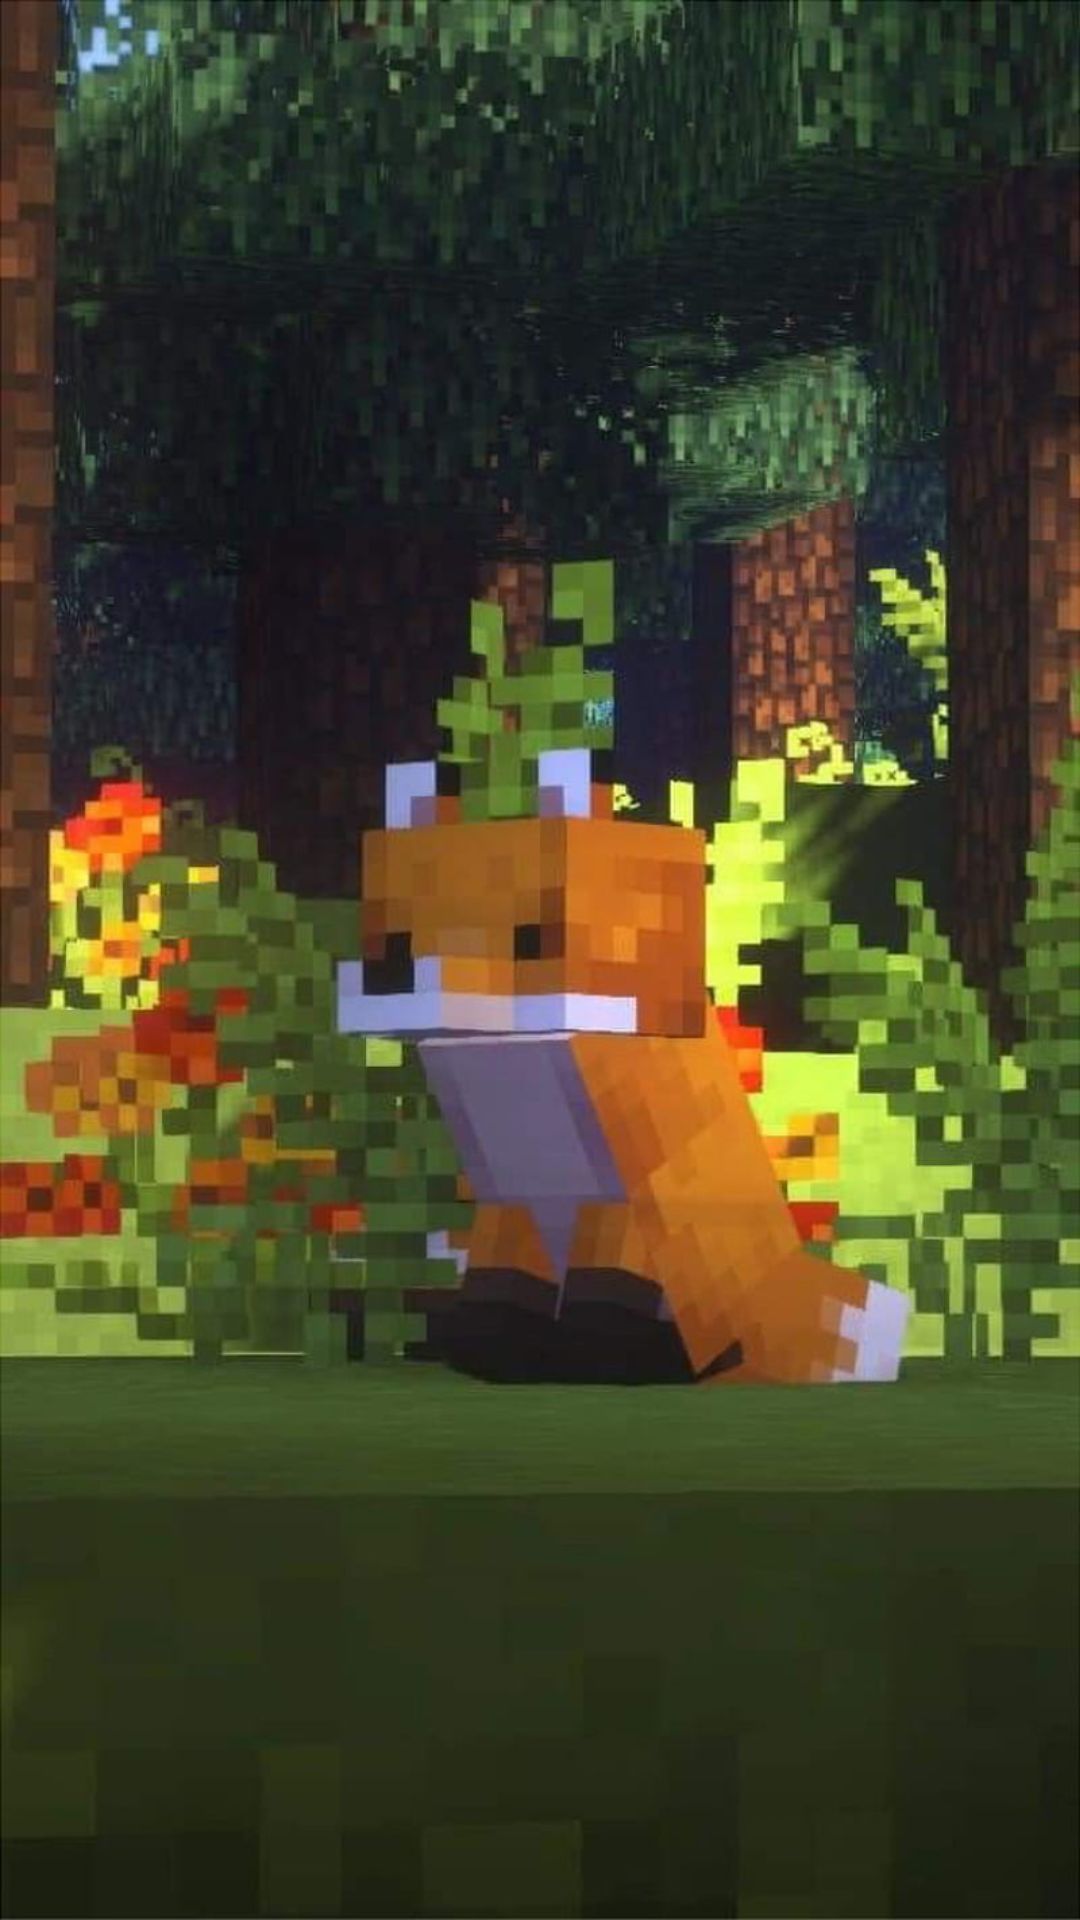 Minecraft fox in the forest wallpaper for iPhone with resolution 1080x1920 pixel. You can make this wallpaper for your iPhone 5, 6, 7, 8, X backgrounds, Mobile Screensaver, or iPad Lock Screen - Minecraft, fox